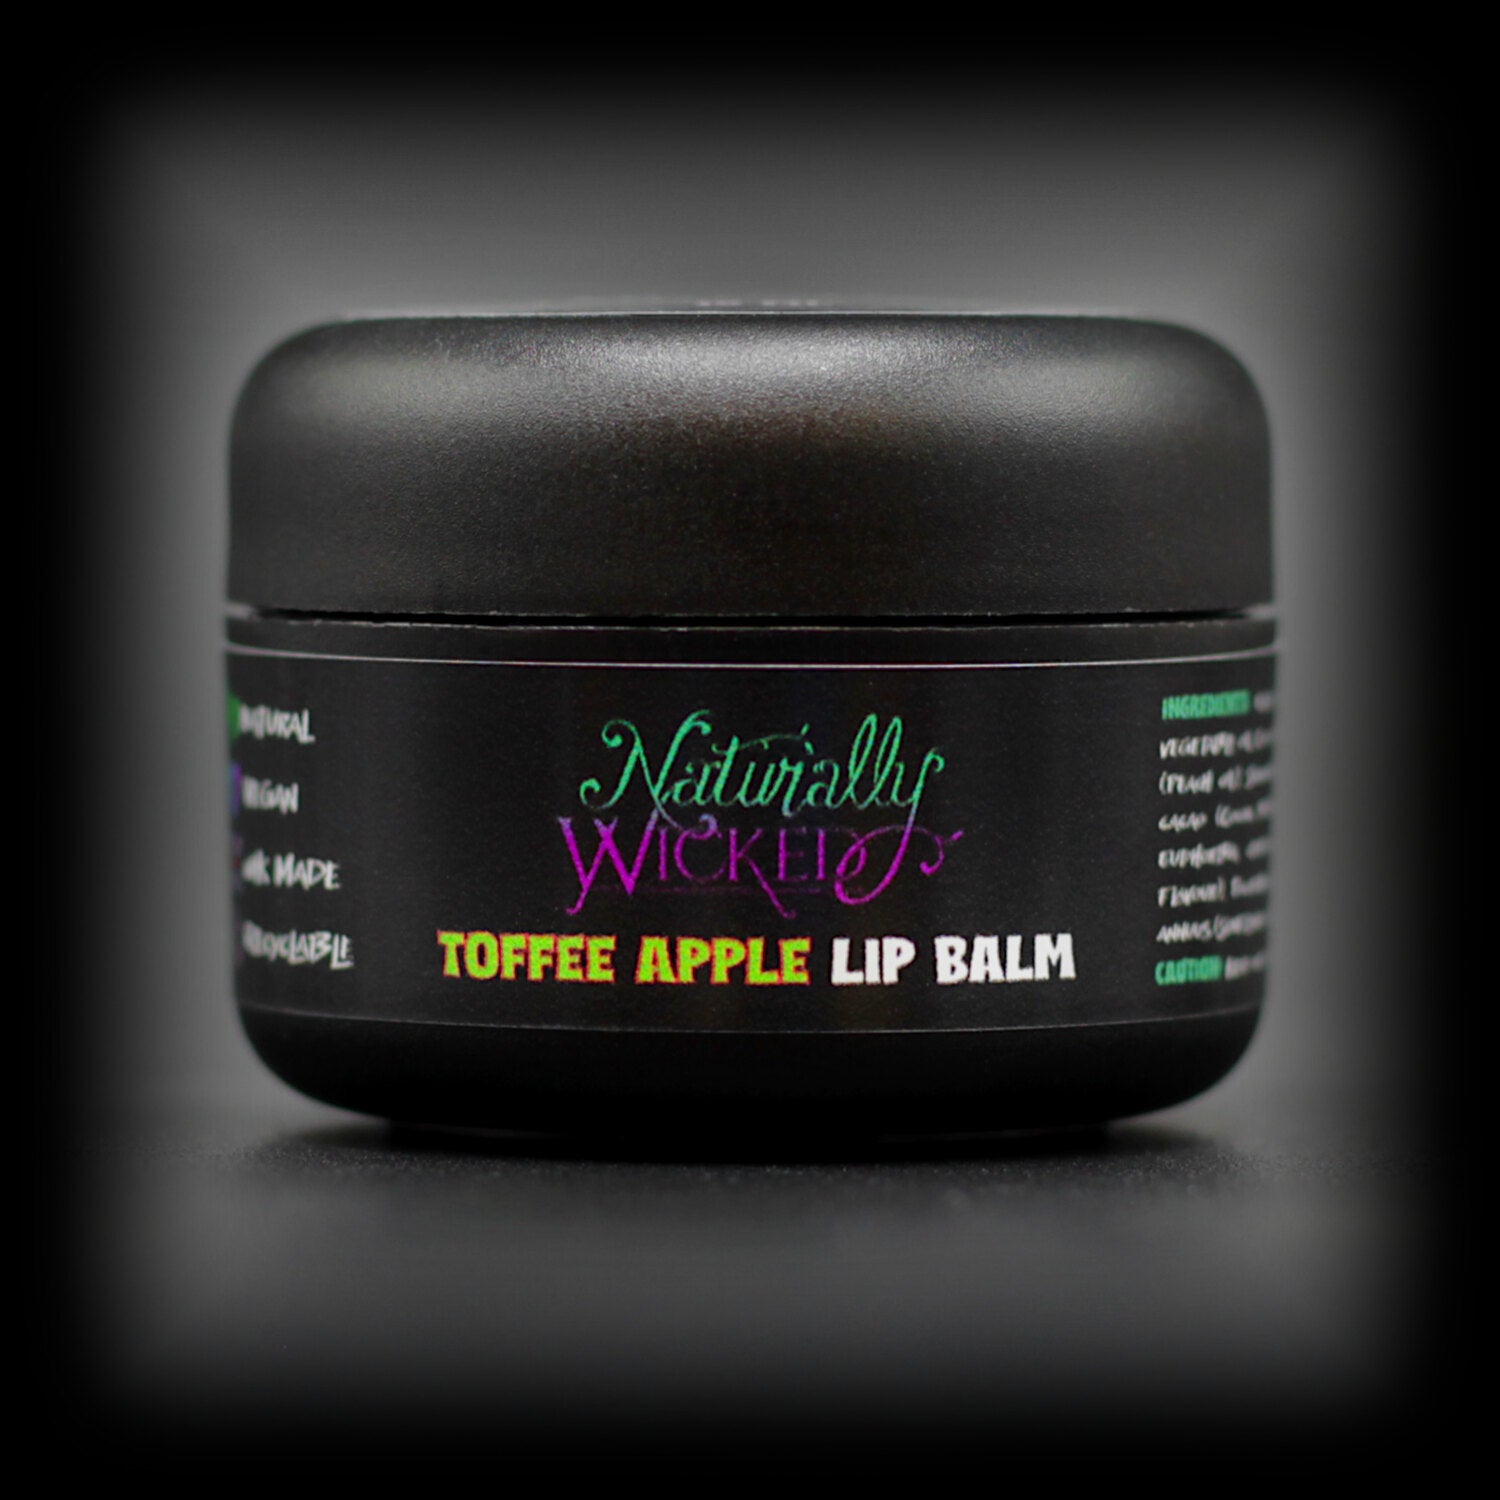 Naturally Wicked Lip Conditioning Toffee Apple Lip Balm In Luxury Compact Handy Pocket Sized Container